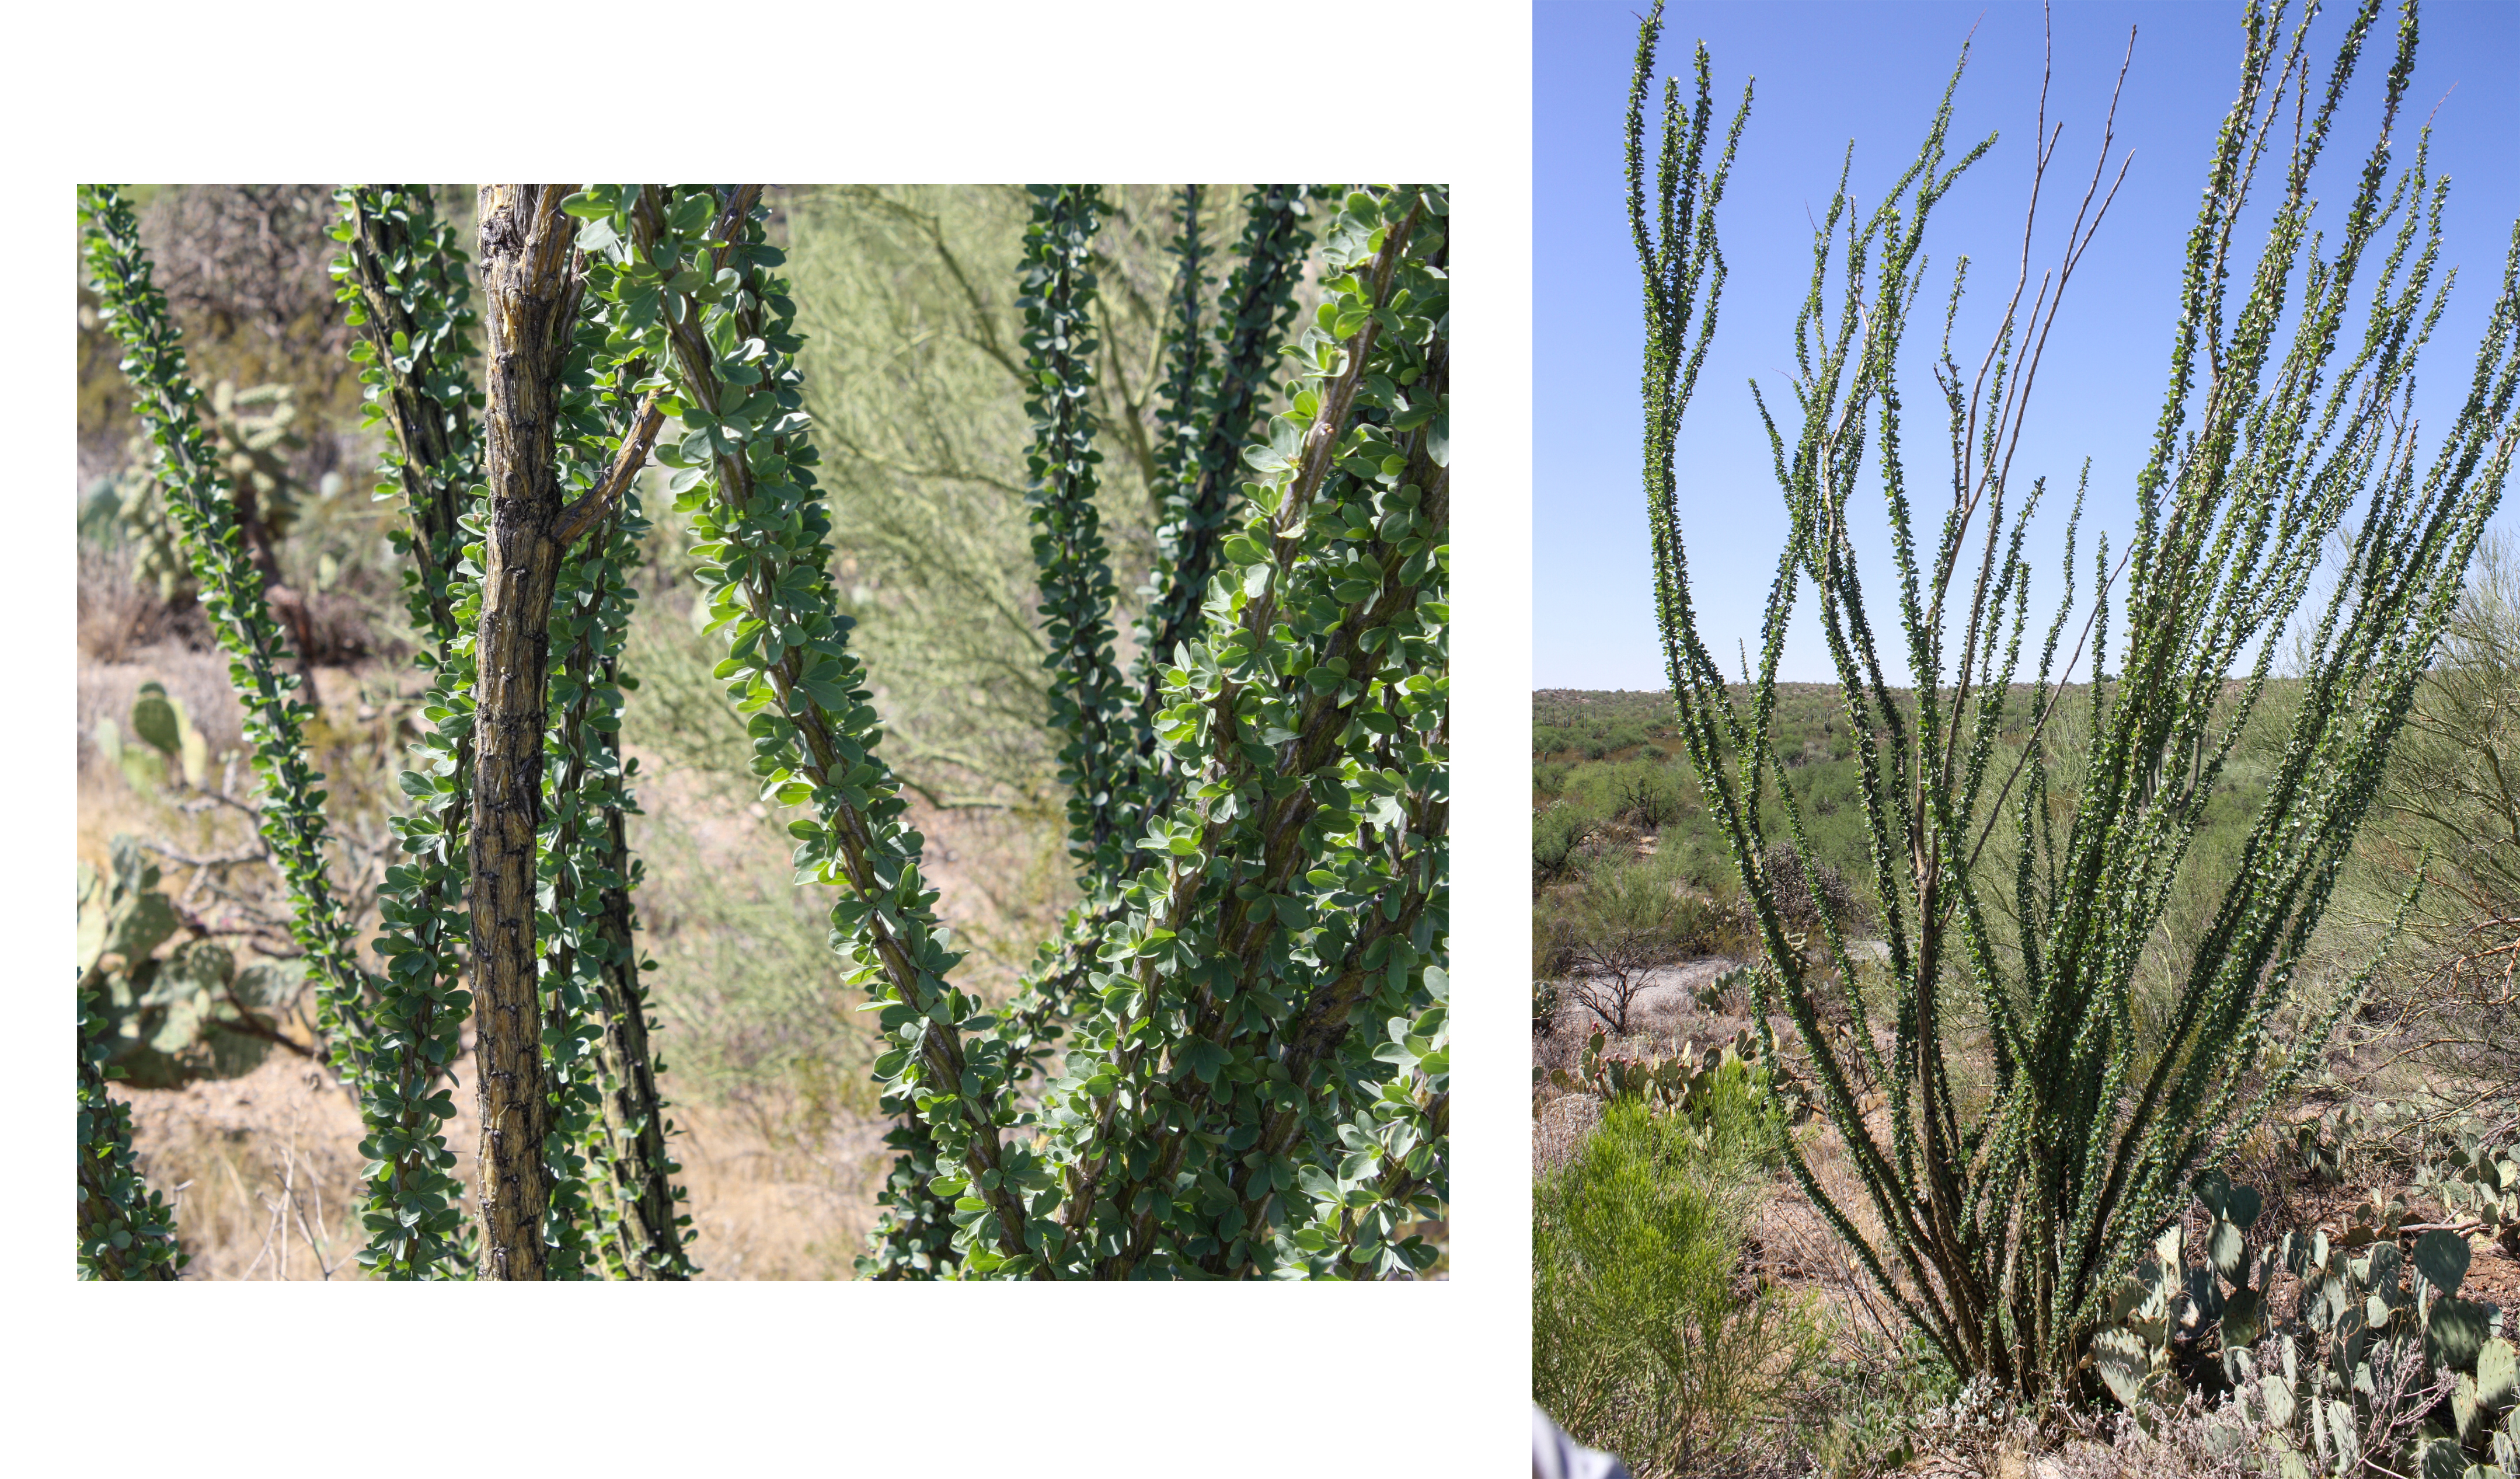 Two photos of ocotillo. One is a close-up of a few branches, showing the woody skeleton. The second is a full-plant photo showing the long branches shooting upwards.